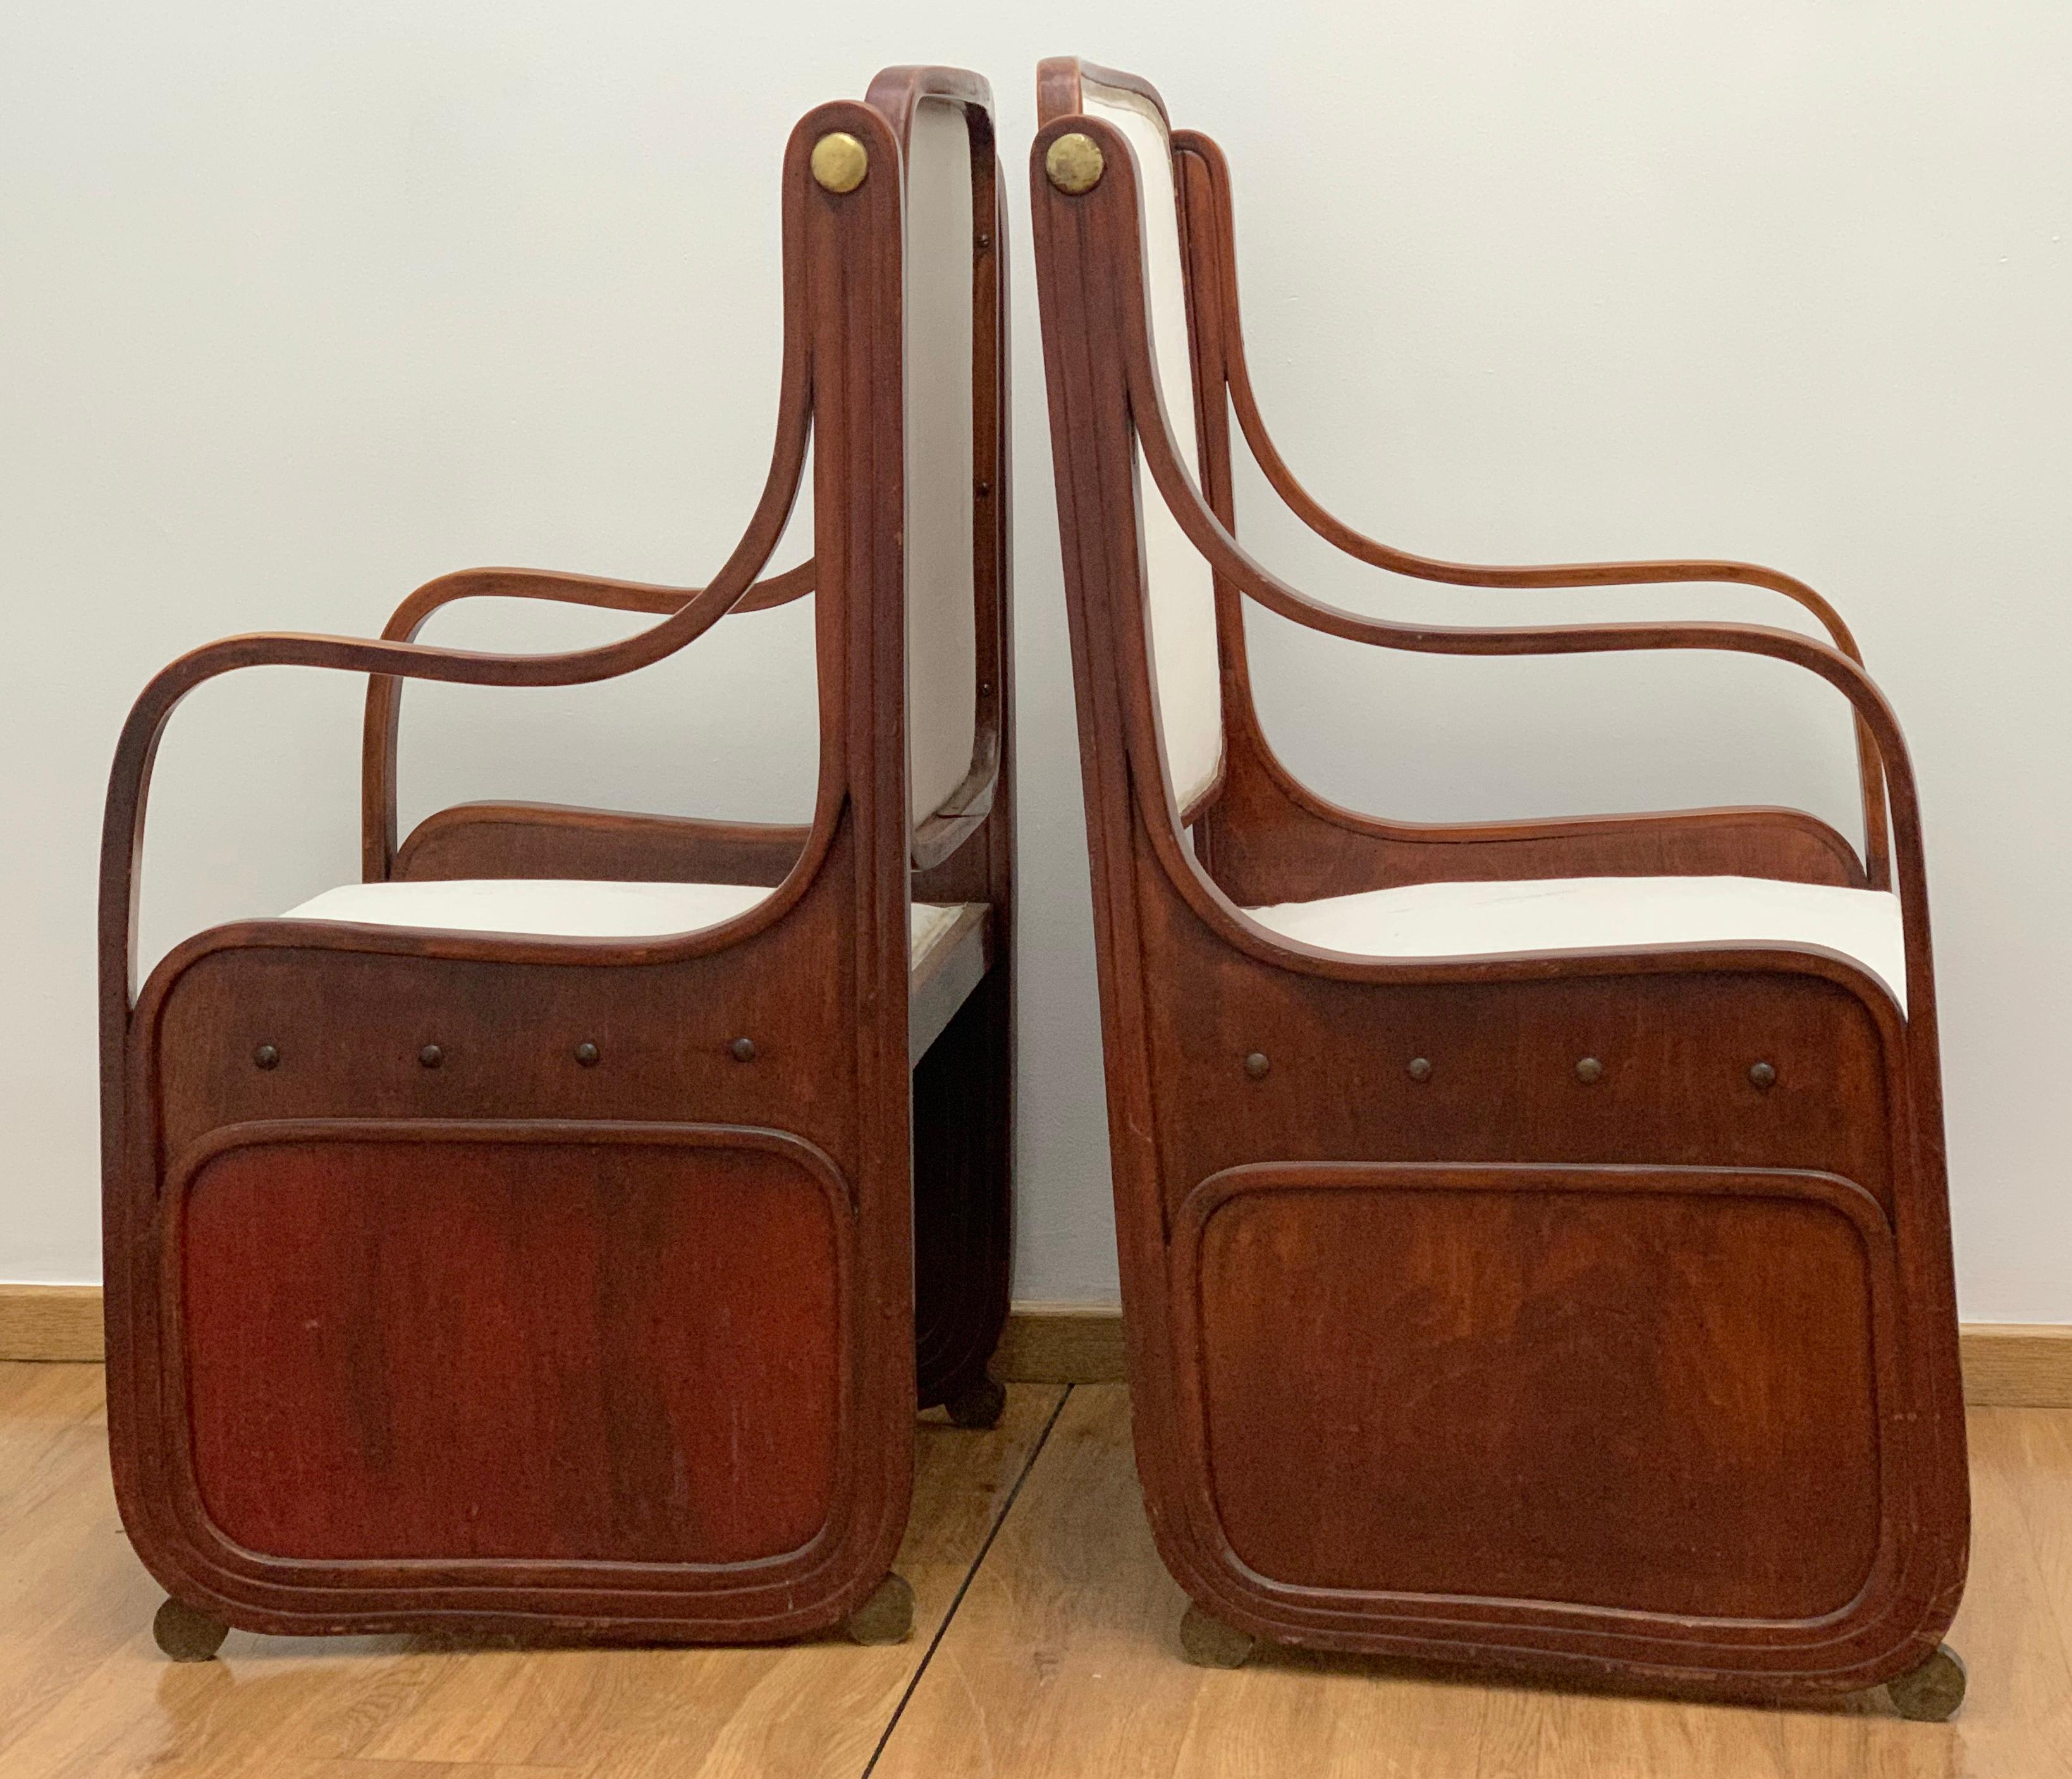 Pair of bentwood armchairs by Koloman Moser, Viennese secession, circa 1900.